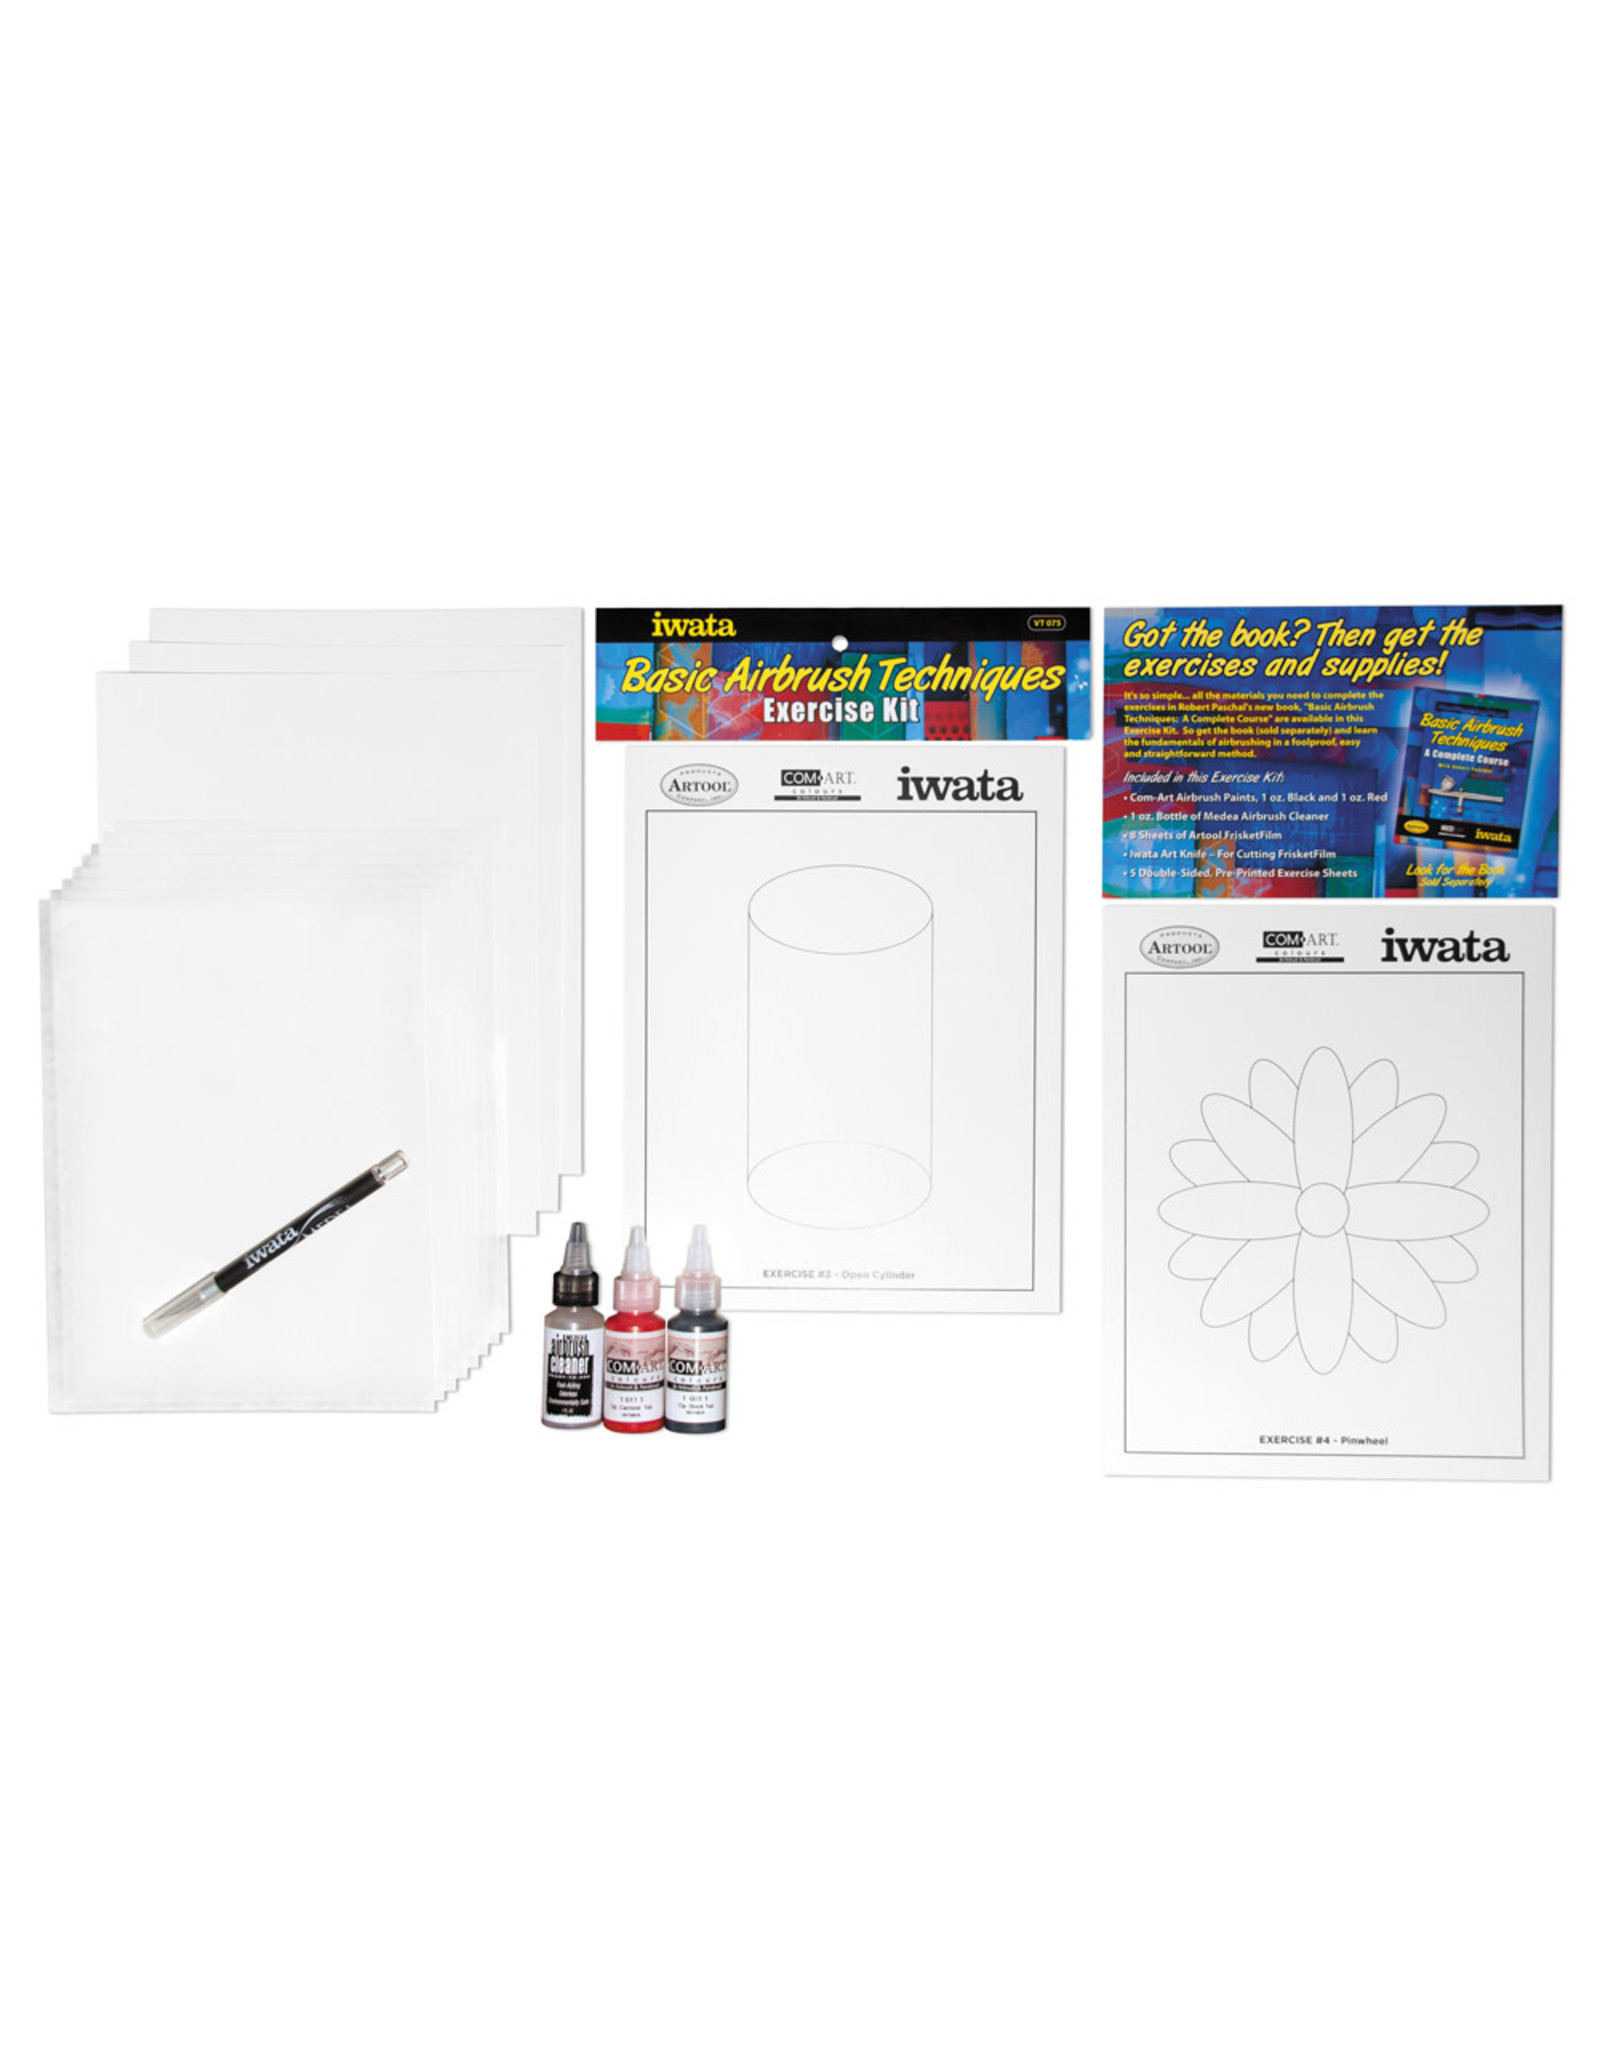 Medea Iwata Basic Airbrush Techniques Exercise Kit by Robert Paschal